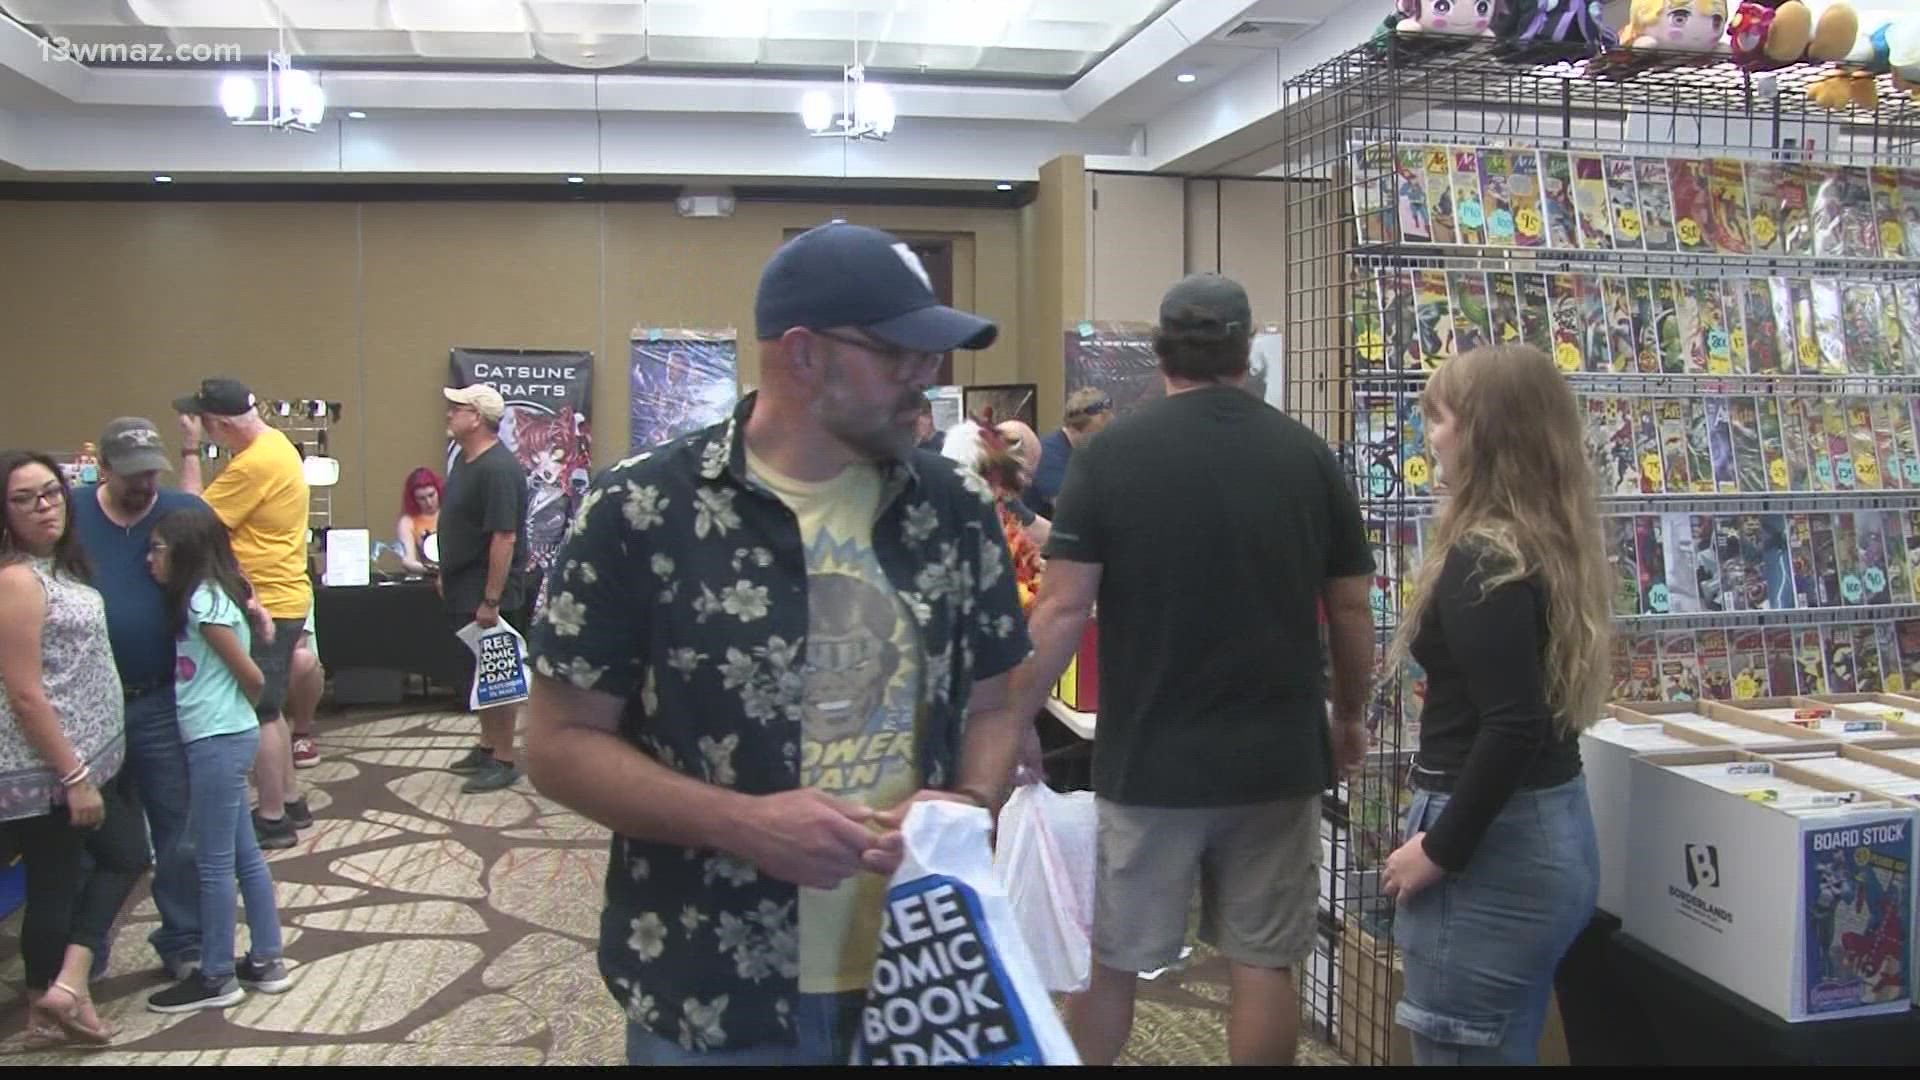 Convention goers got to nerd out on everything from comics and action figured to posters and lightsabers.